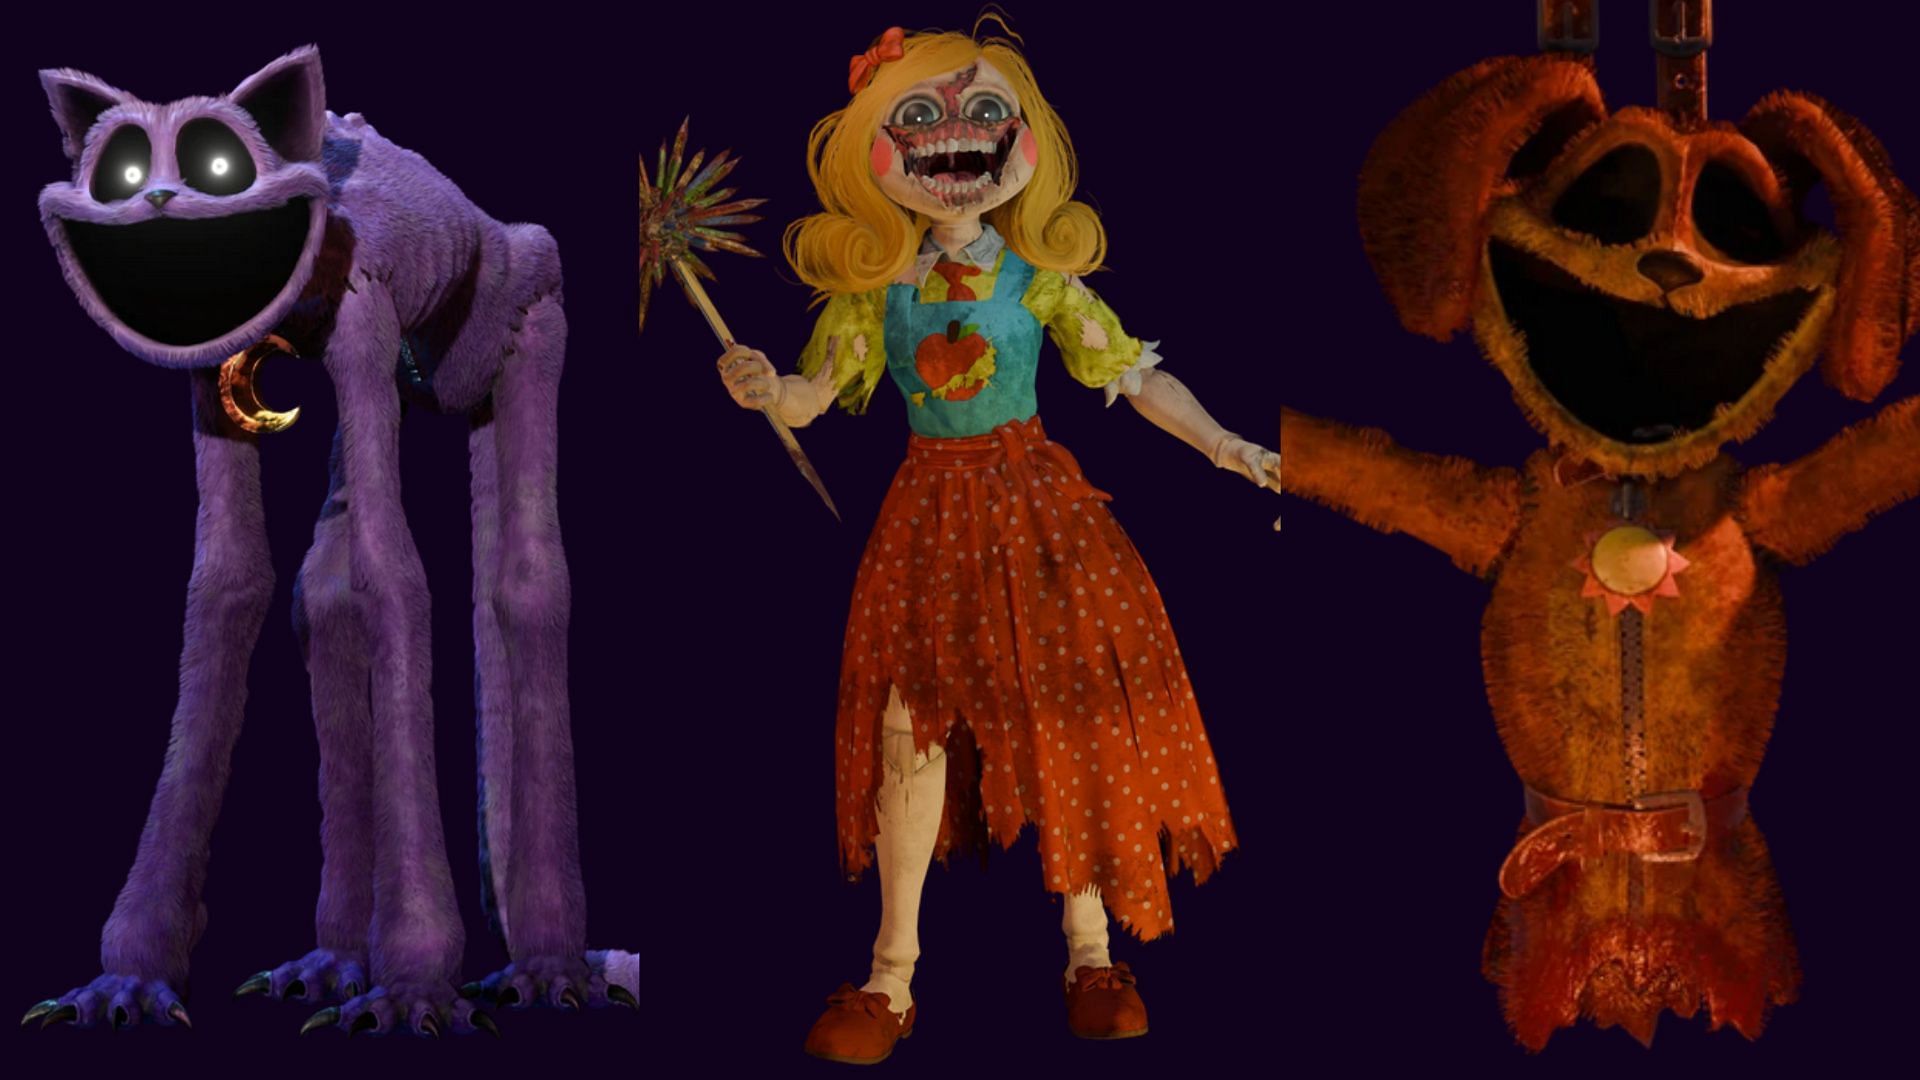 All Poppy Playtime characters